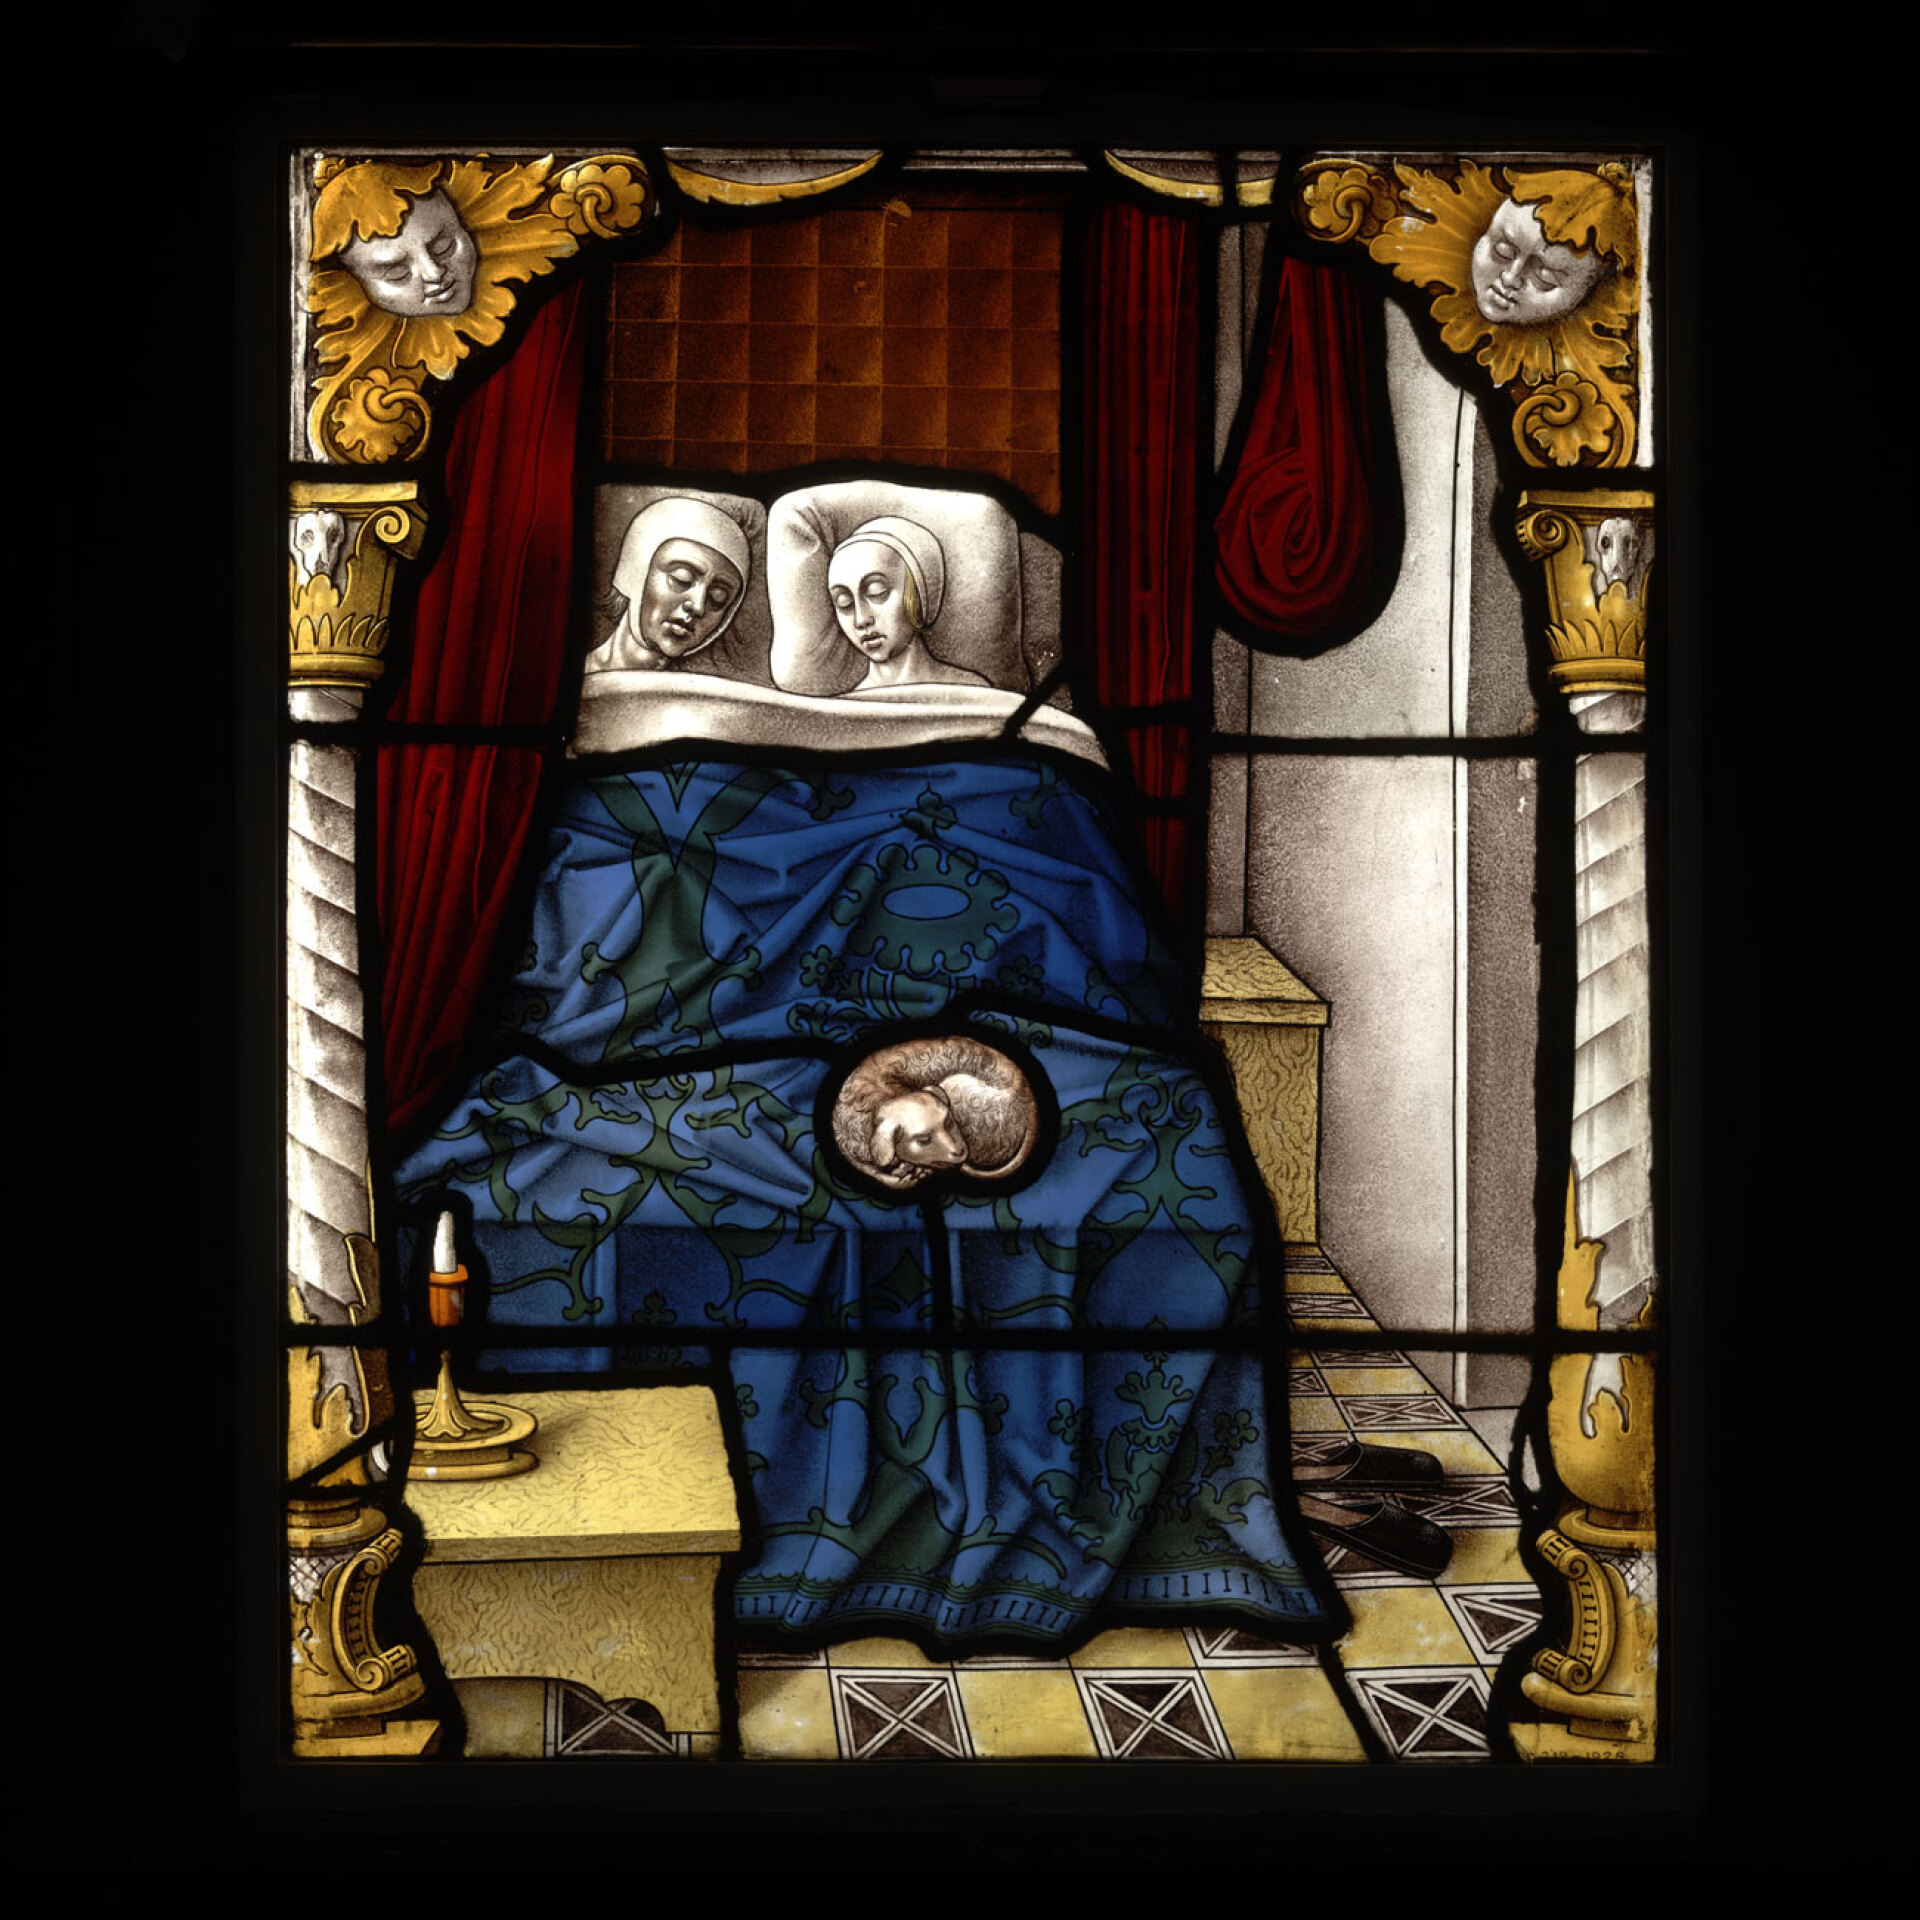 tobias-and-sara-on-their-wedding-night-about-1520-cologne-germany-stained-glass-panel-c-victoria-and-albert-museum-london.jpg